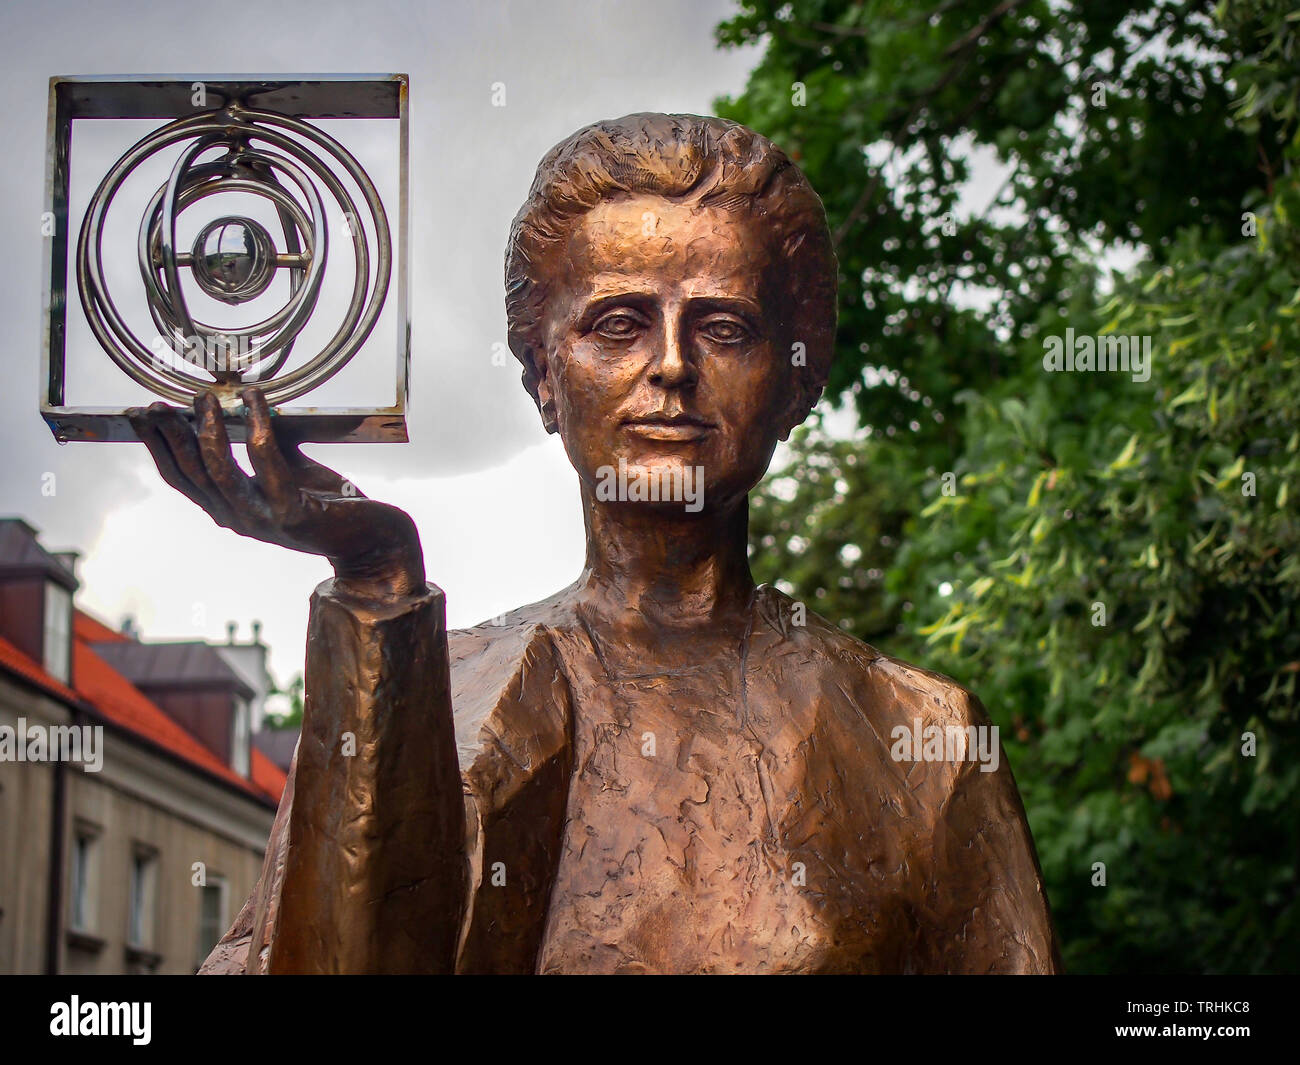 WARSAW, POLAND - JULY 25, 2017 Bronze monument to Marie Sklodowska-Curie close-up Stock Photo